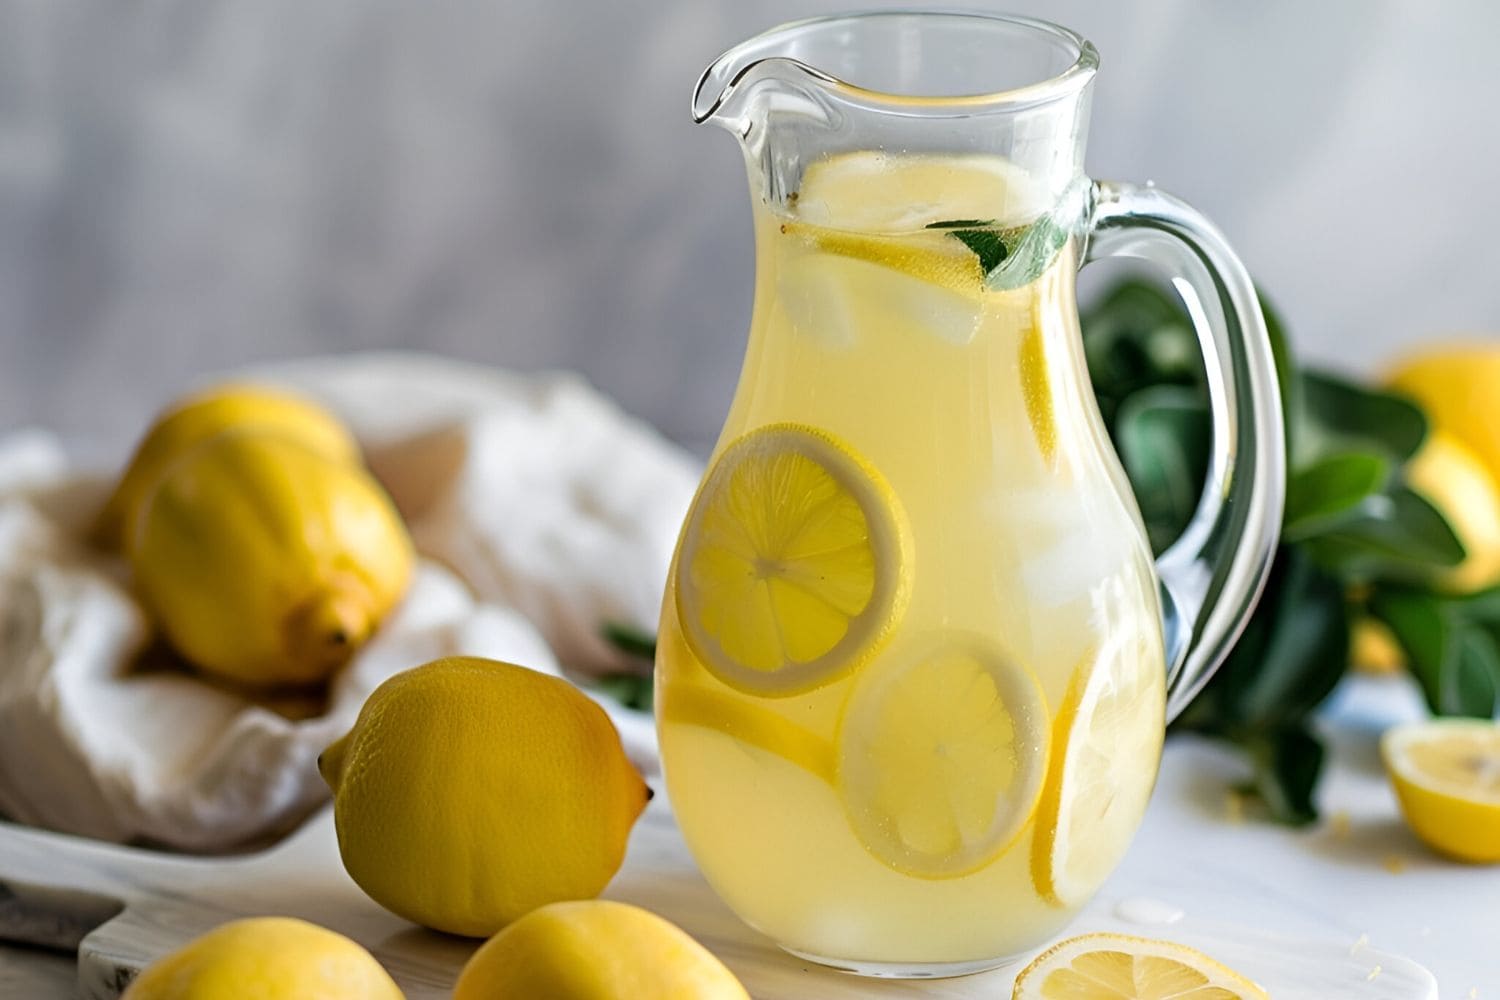 Chick-Fil-A Lemonade in a Pitcher with Lemons